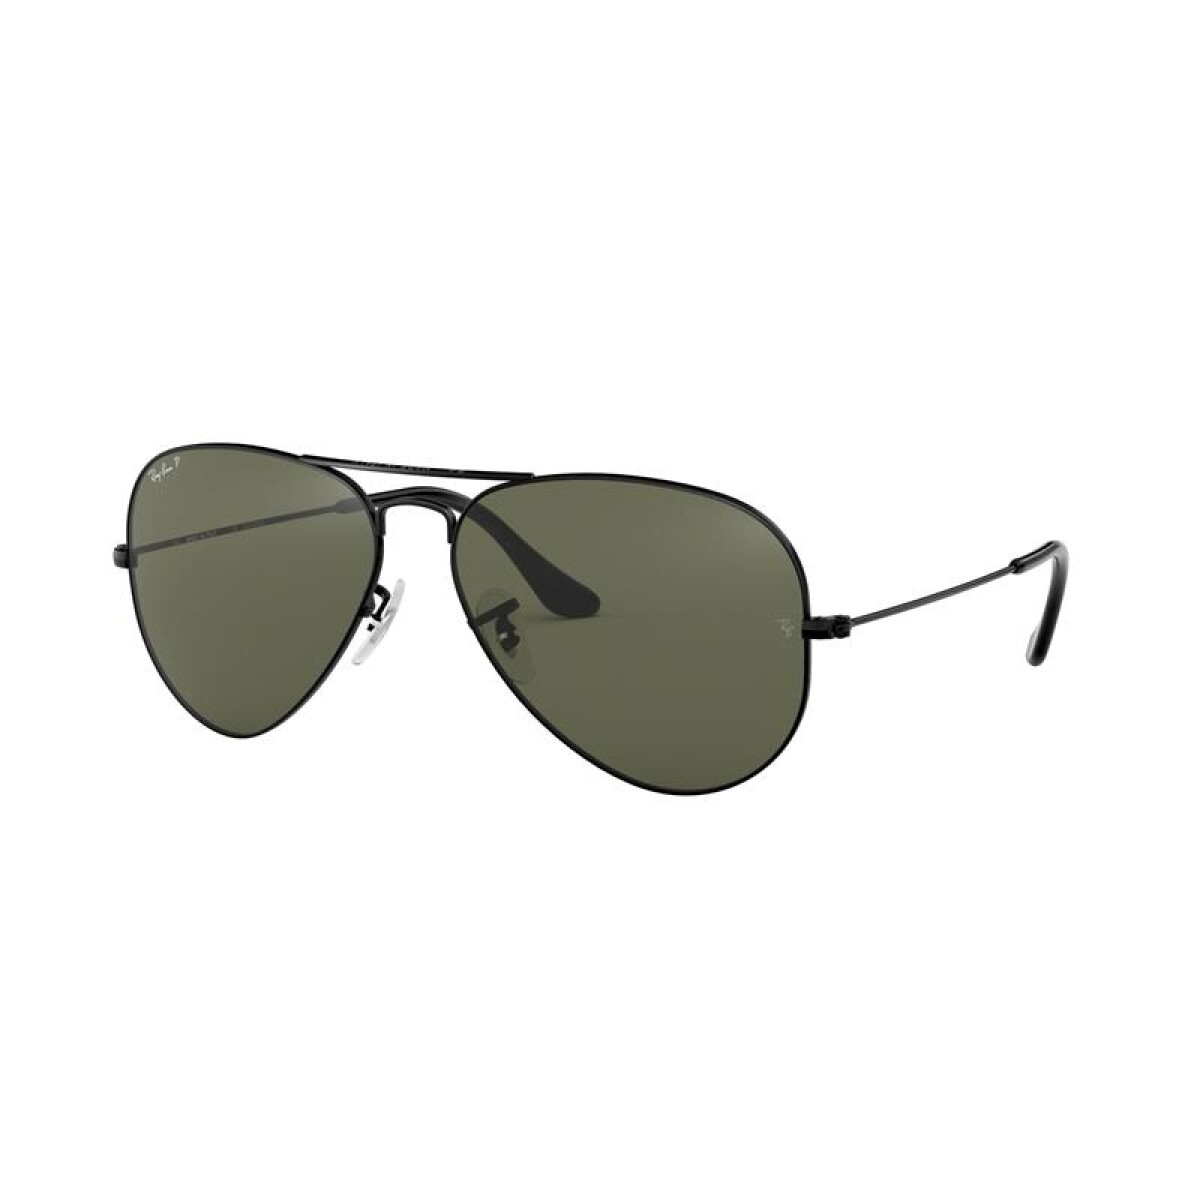 Ray Ban Rb3025l - 002/58 